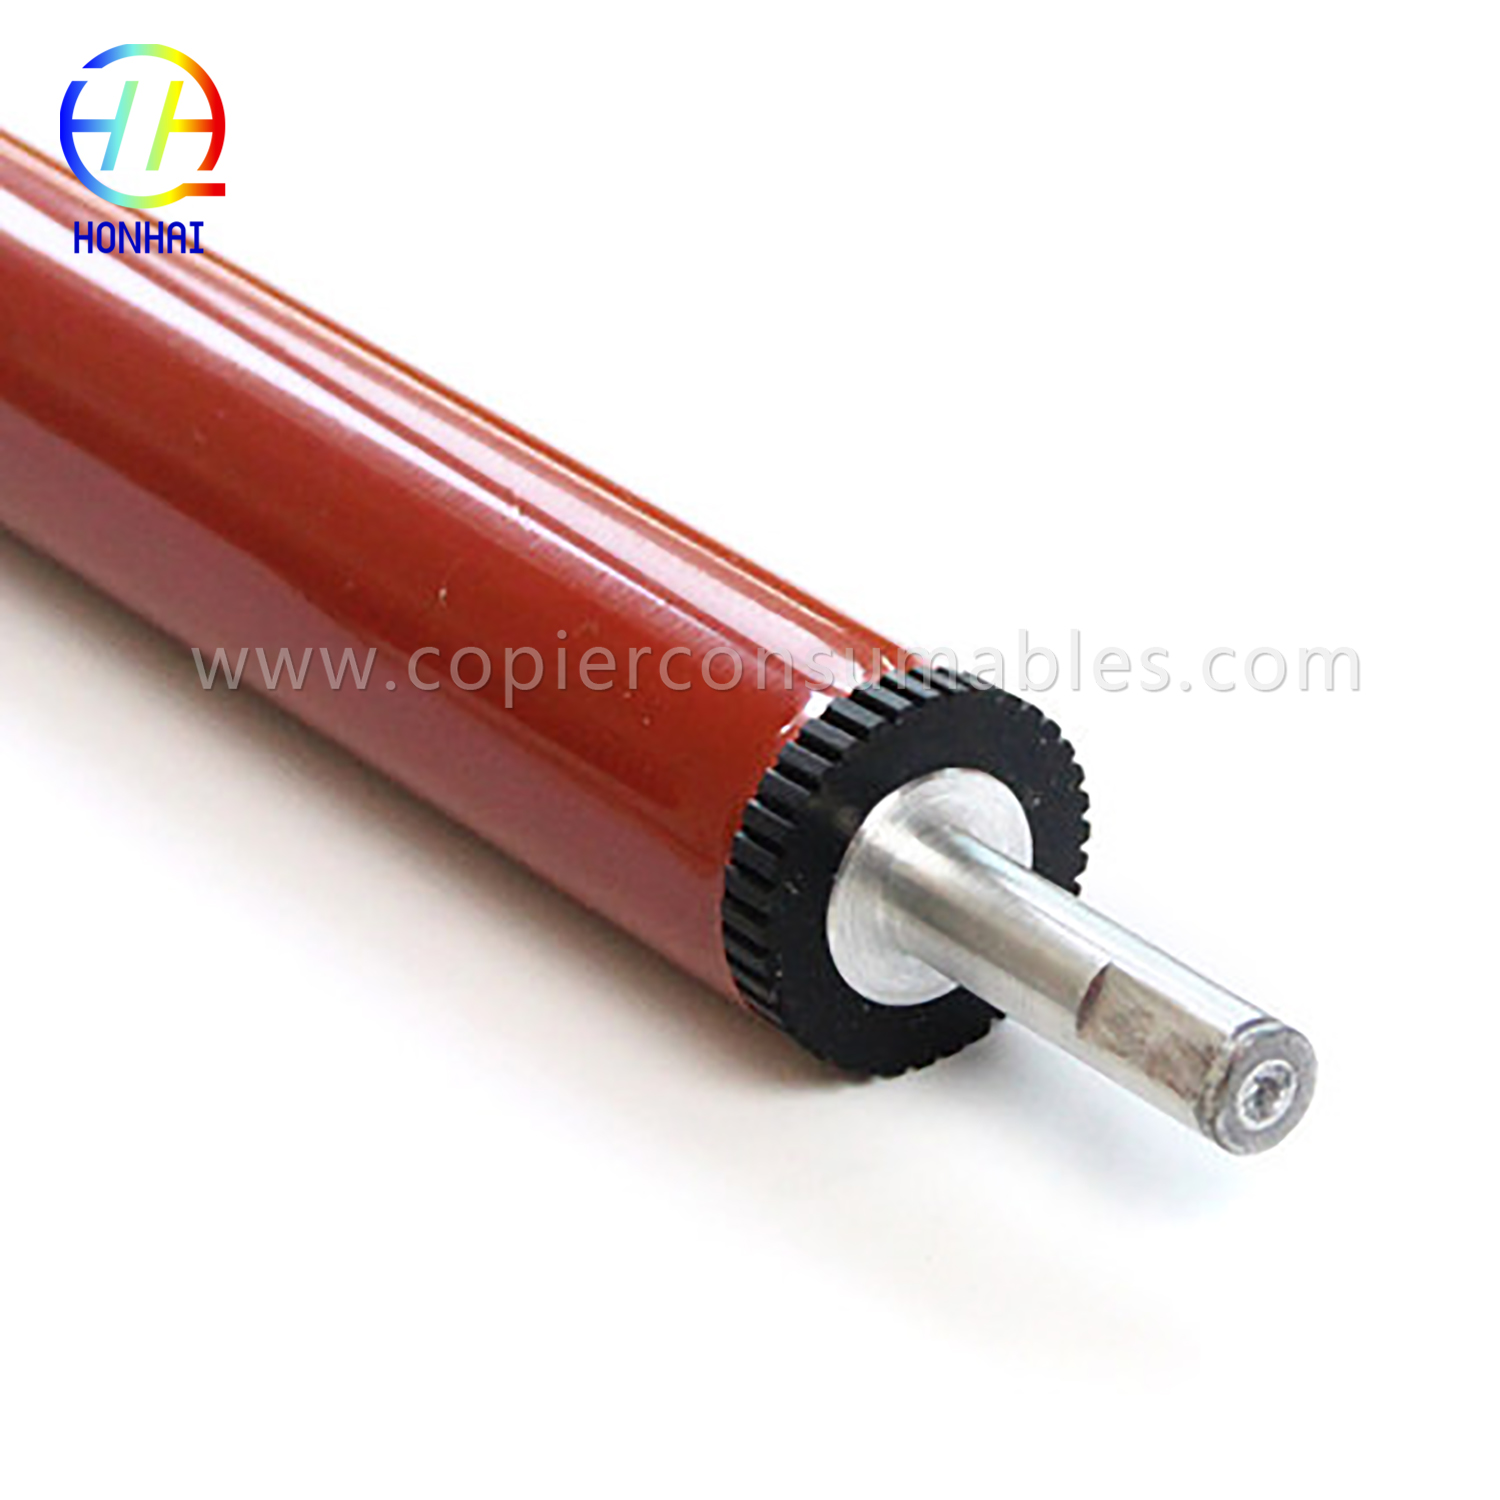 Lower Pressure Roller for HP 5200 不要盒子 (2) 拷贝